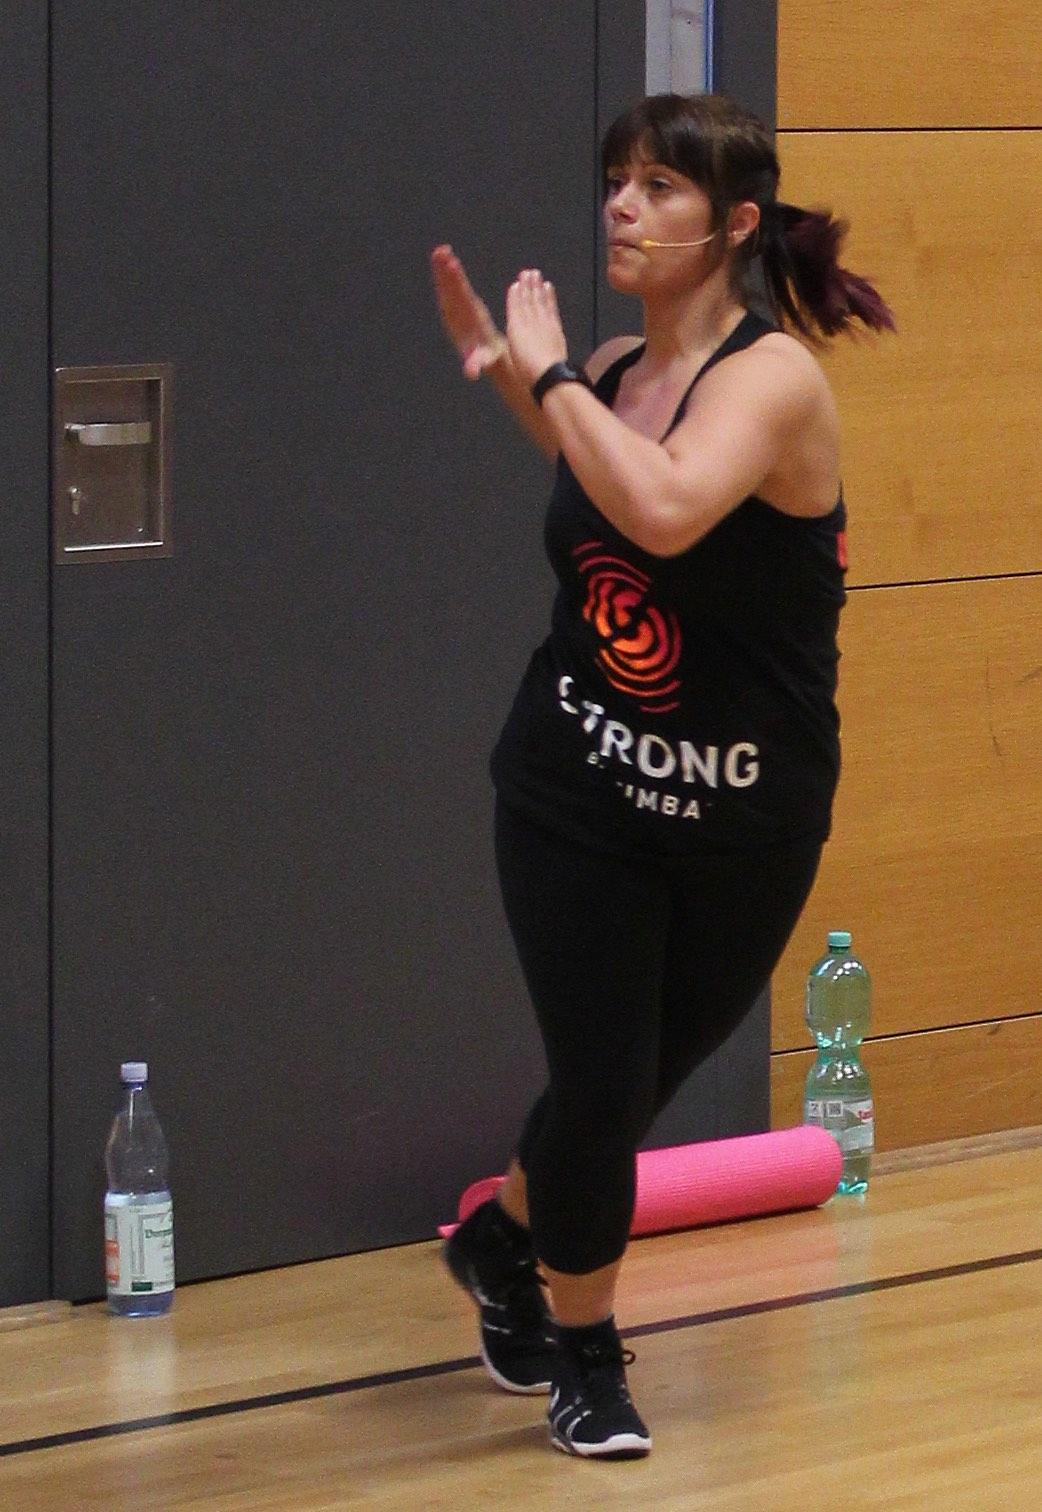 STRONG by Zumba®